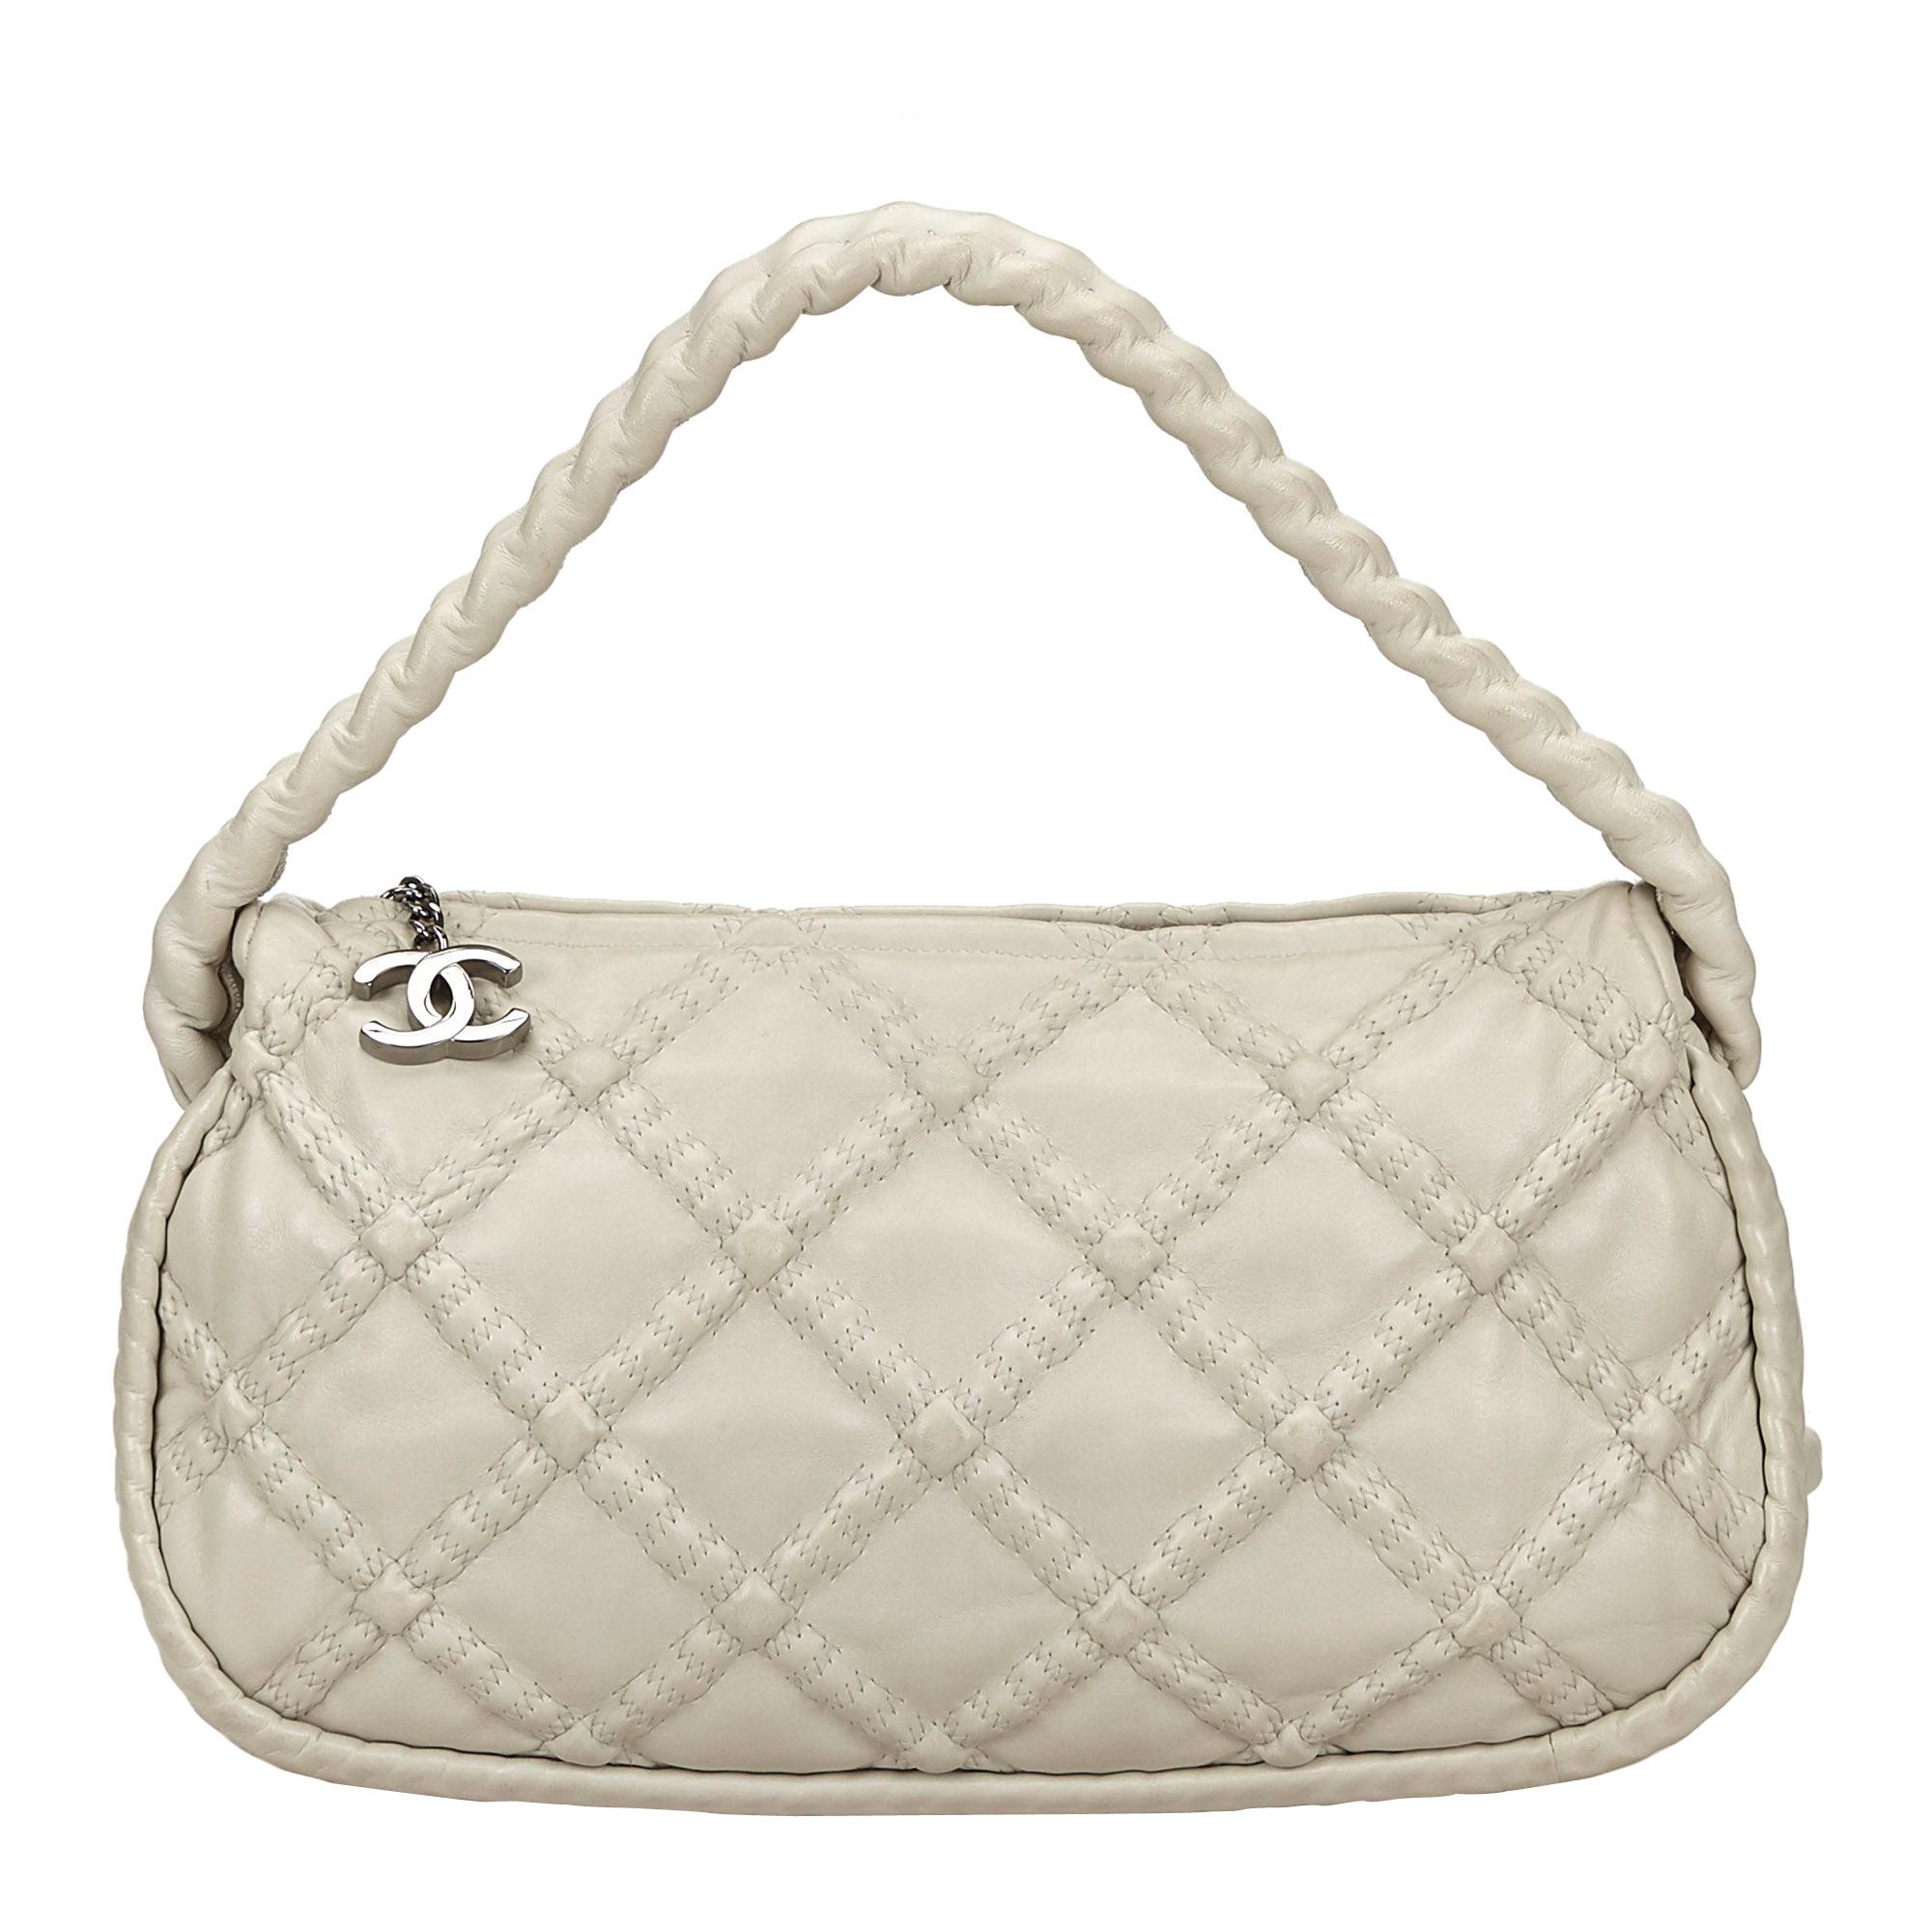 Vintage Authentic Chanel White Quilted Shoulder Bag Italy w Dust Bag MEDIUM  For Sale